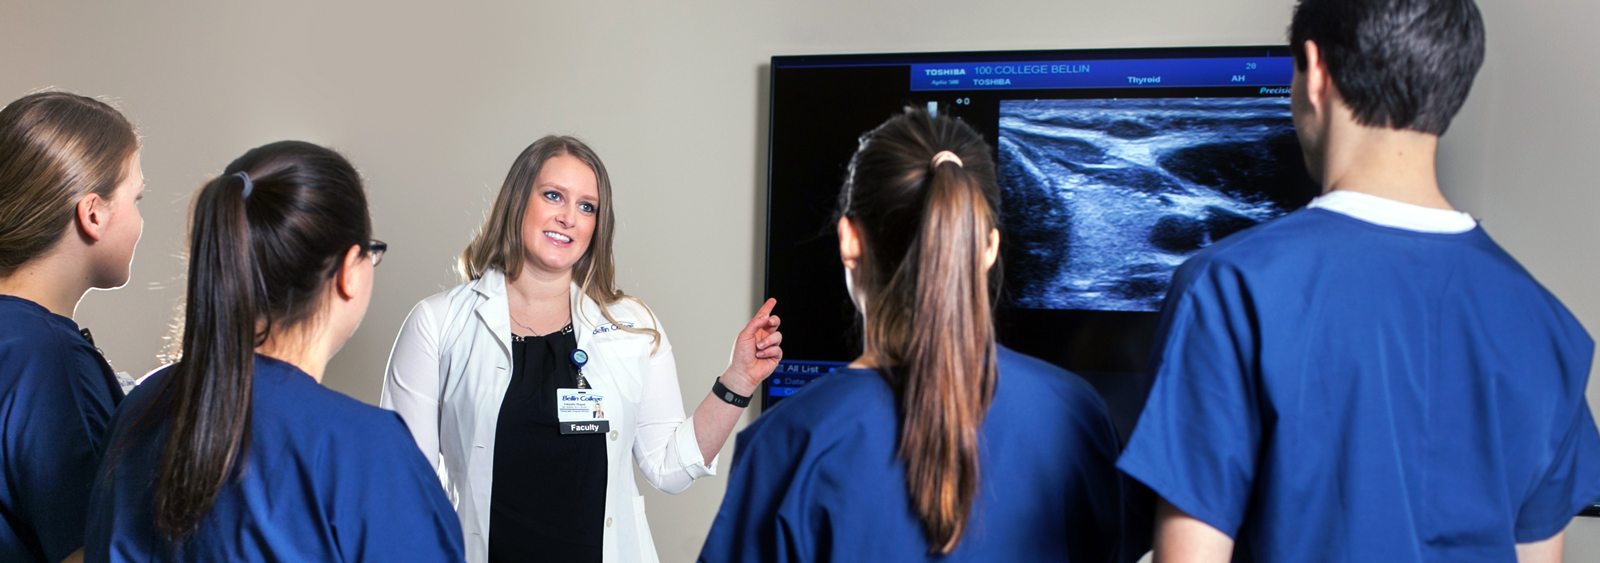 Sonography instructor showing students a patient scan on a large screen TV.